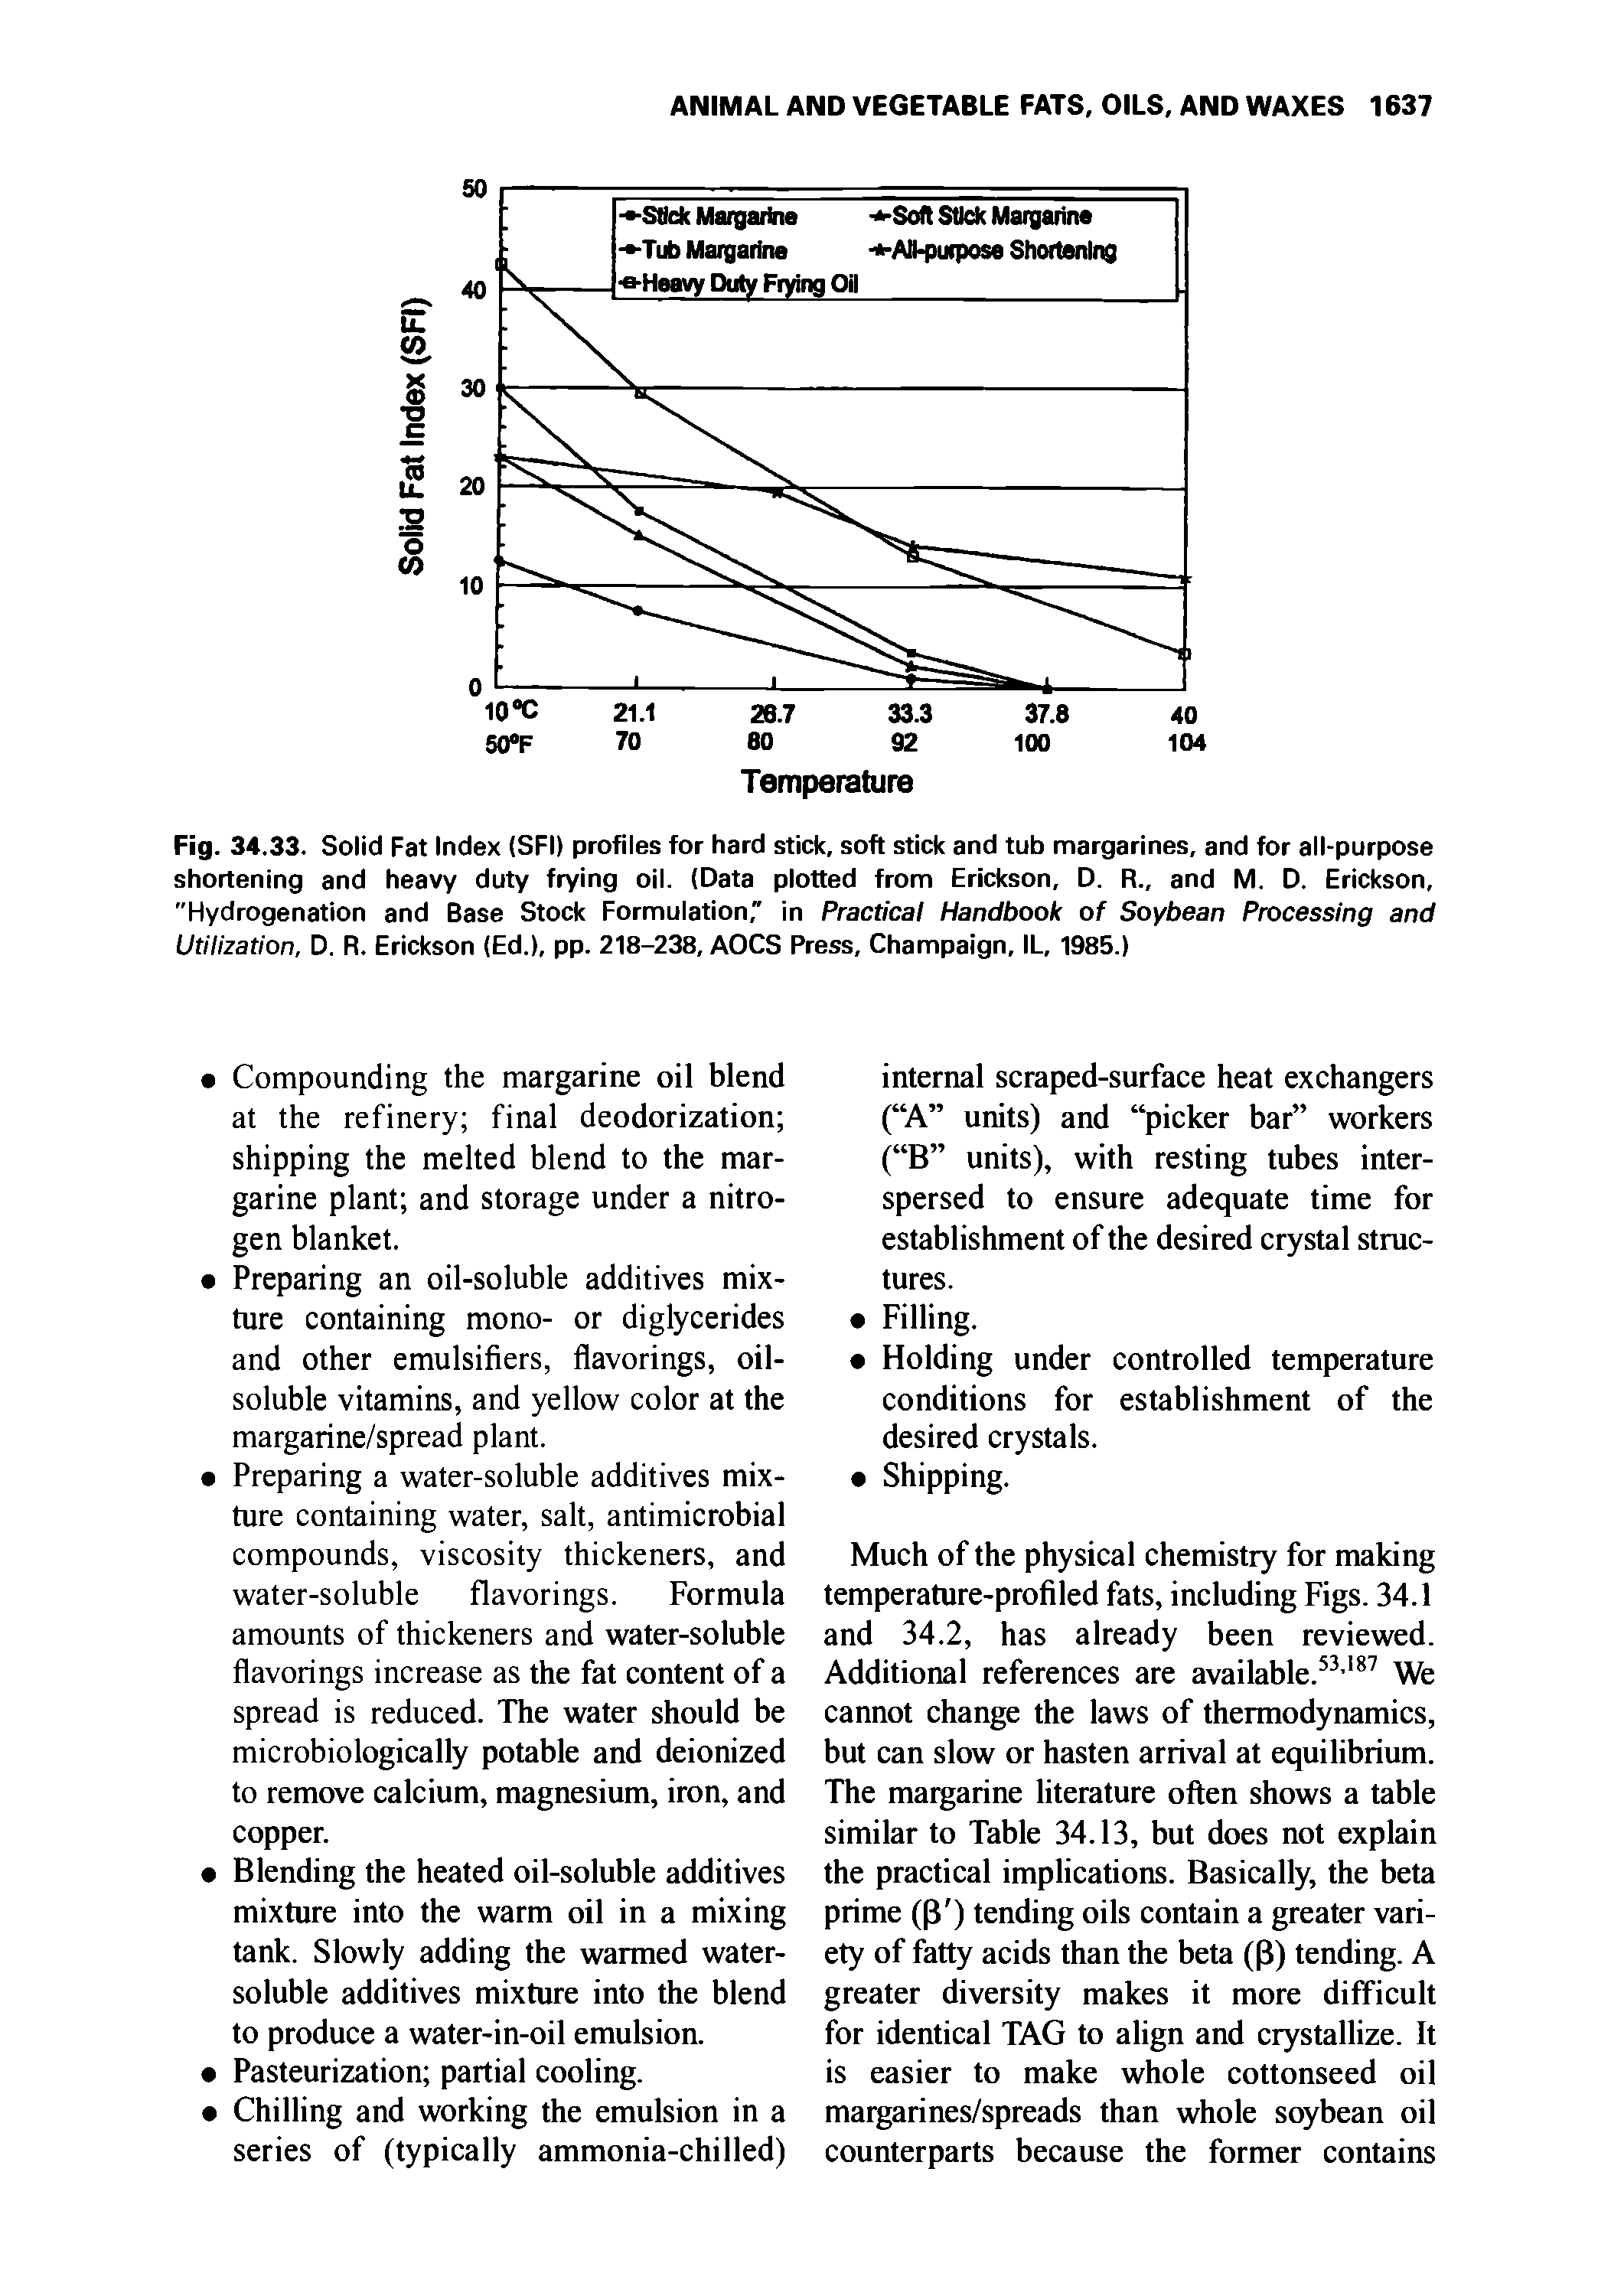 Fig. 34.33. Solid Fat Index (SFI) profiles for hard stick, soft stick and tub margarines, and for all-purpose shortening and heavy duty frying oil. (Data plotted from Erickson, D. R., and M. D. Erickson, "Hydrogenation and Base Stock Formulation," in Practical Handbook of Soybean Processing and Utilization, D. R. Erickson (Ed.), pp. 218-238, AOCS Press, Champaign, IL, 1985.)...